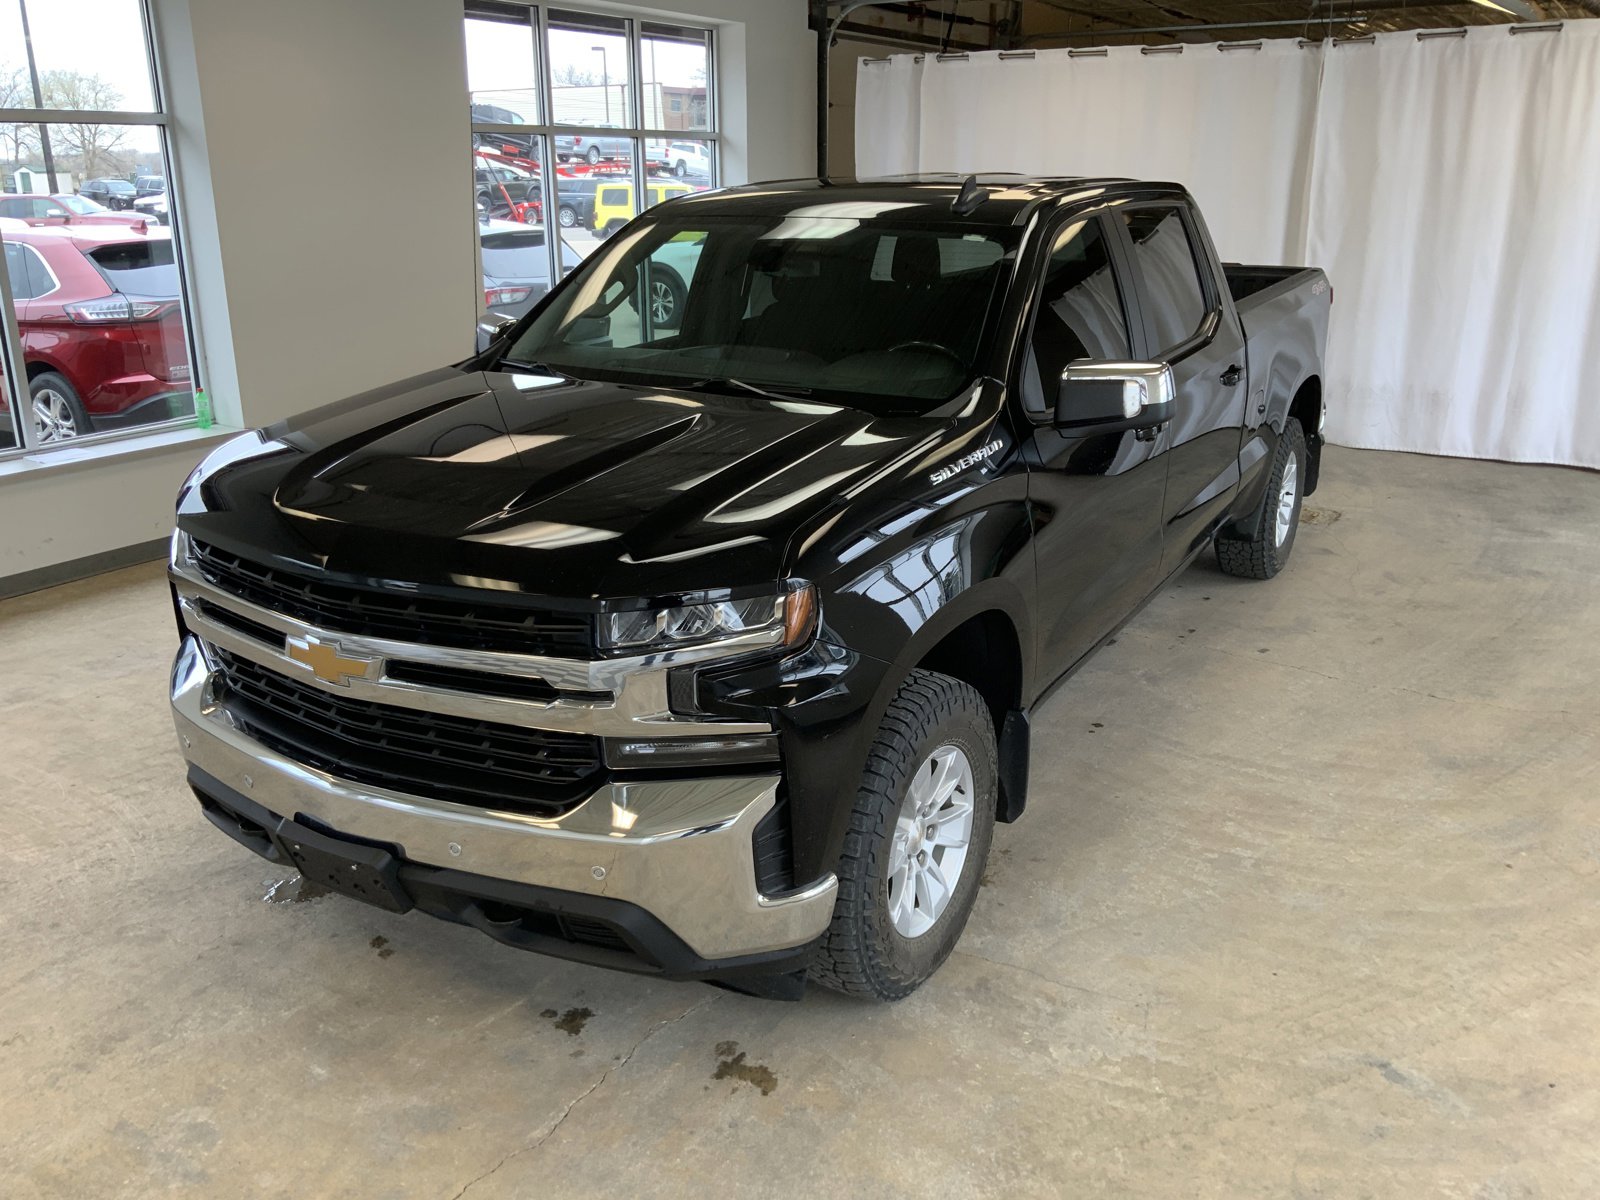 Used 2021 Chevrolet Silverado 1500 LT with VIN 1GCUYDED1MZ385390 for sale in Alexandria, Minnesota